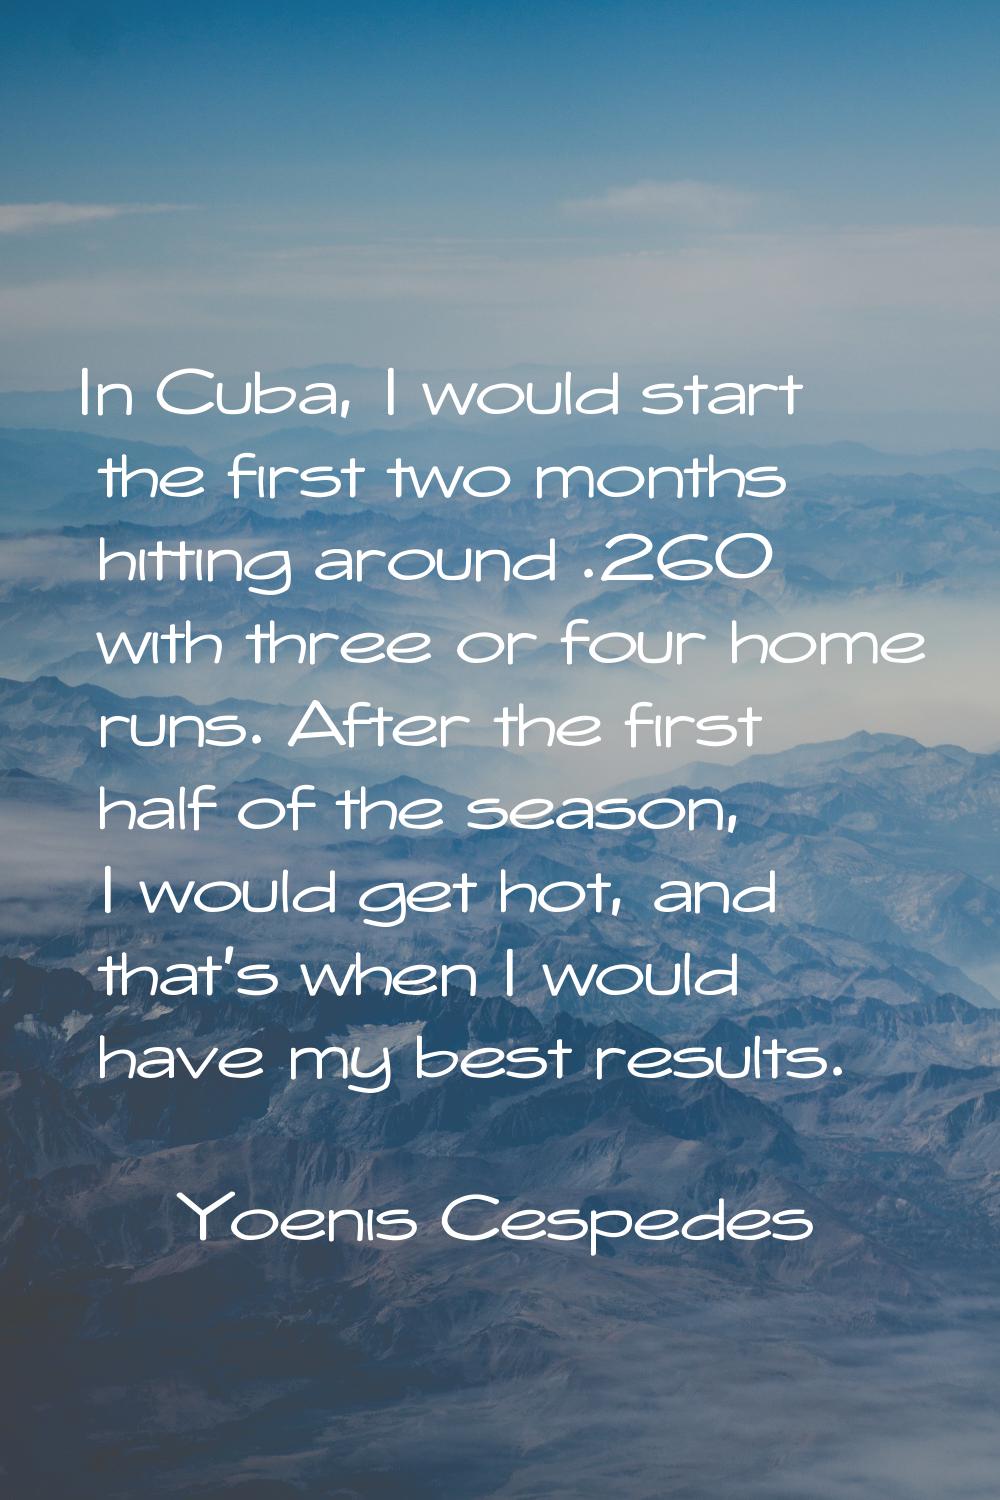 In Cuba, I would start the first two months hitting around .260 with three or four home runs. After